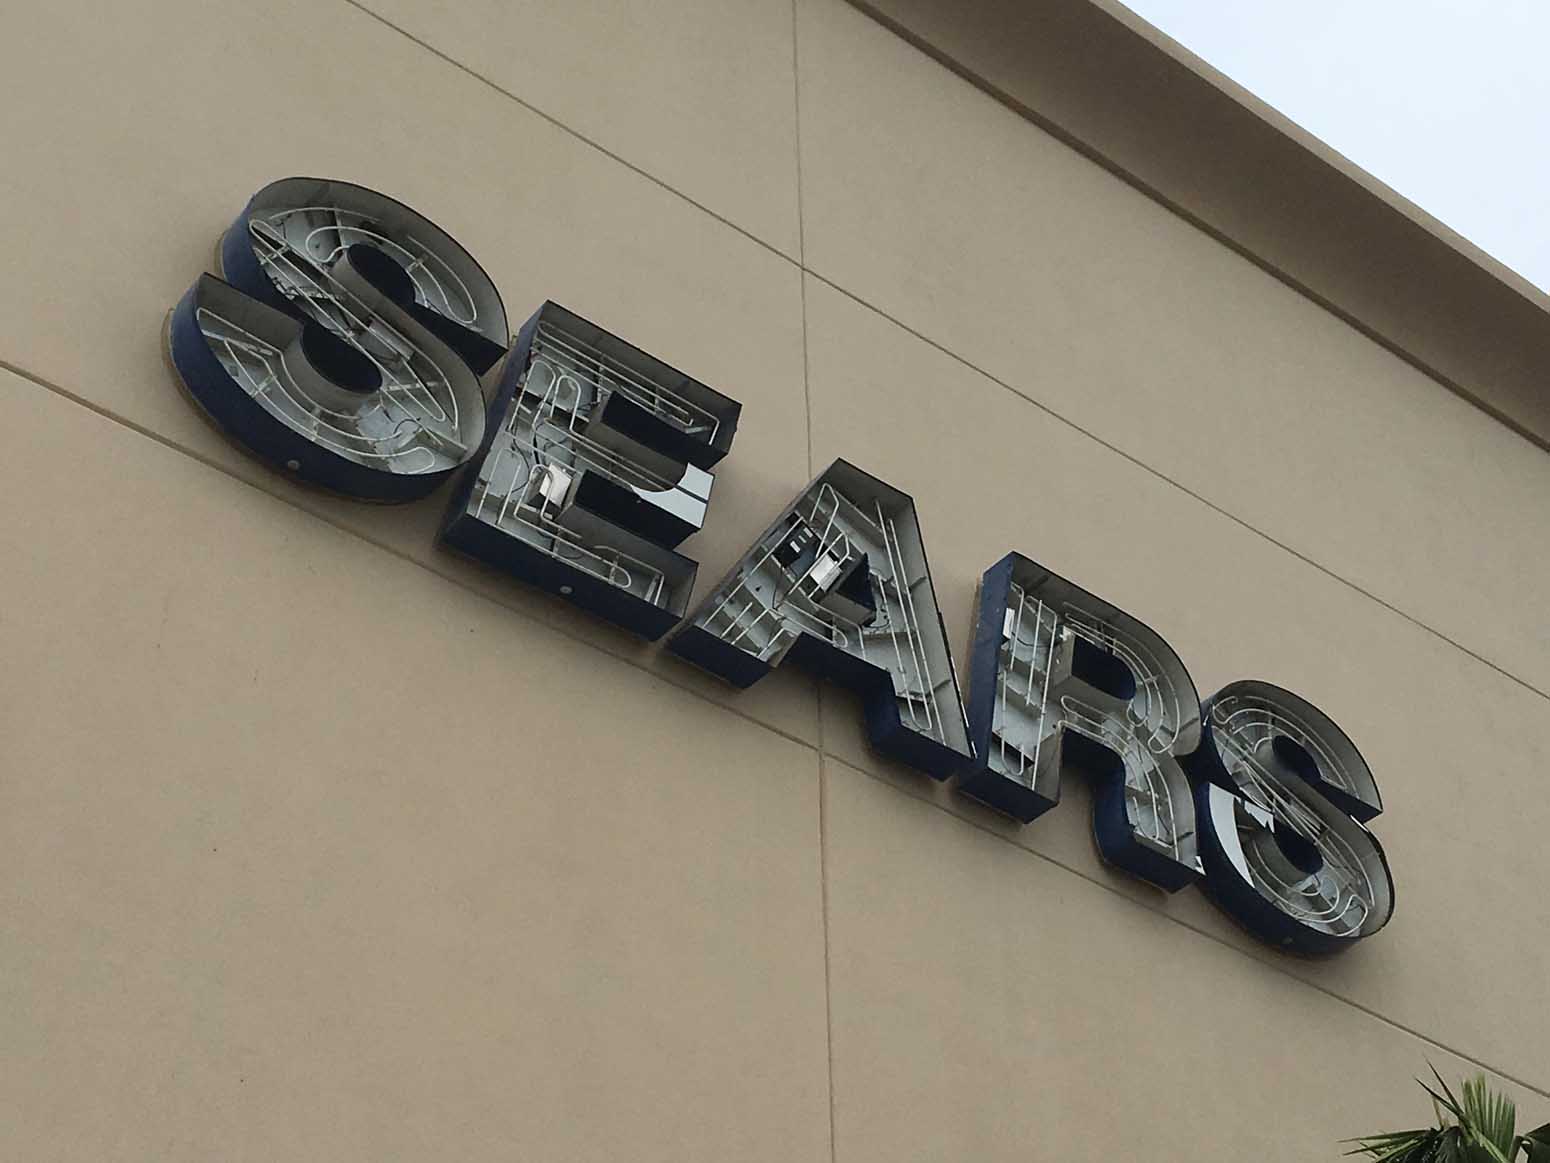 The damaged Sears sign at Plaza Las Americas